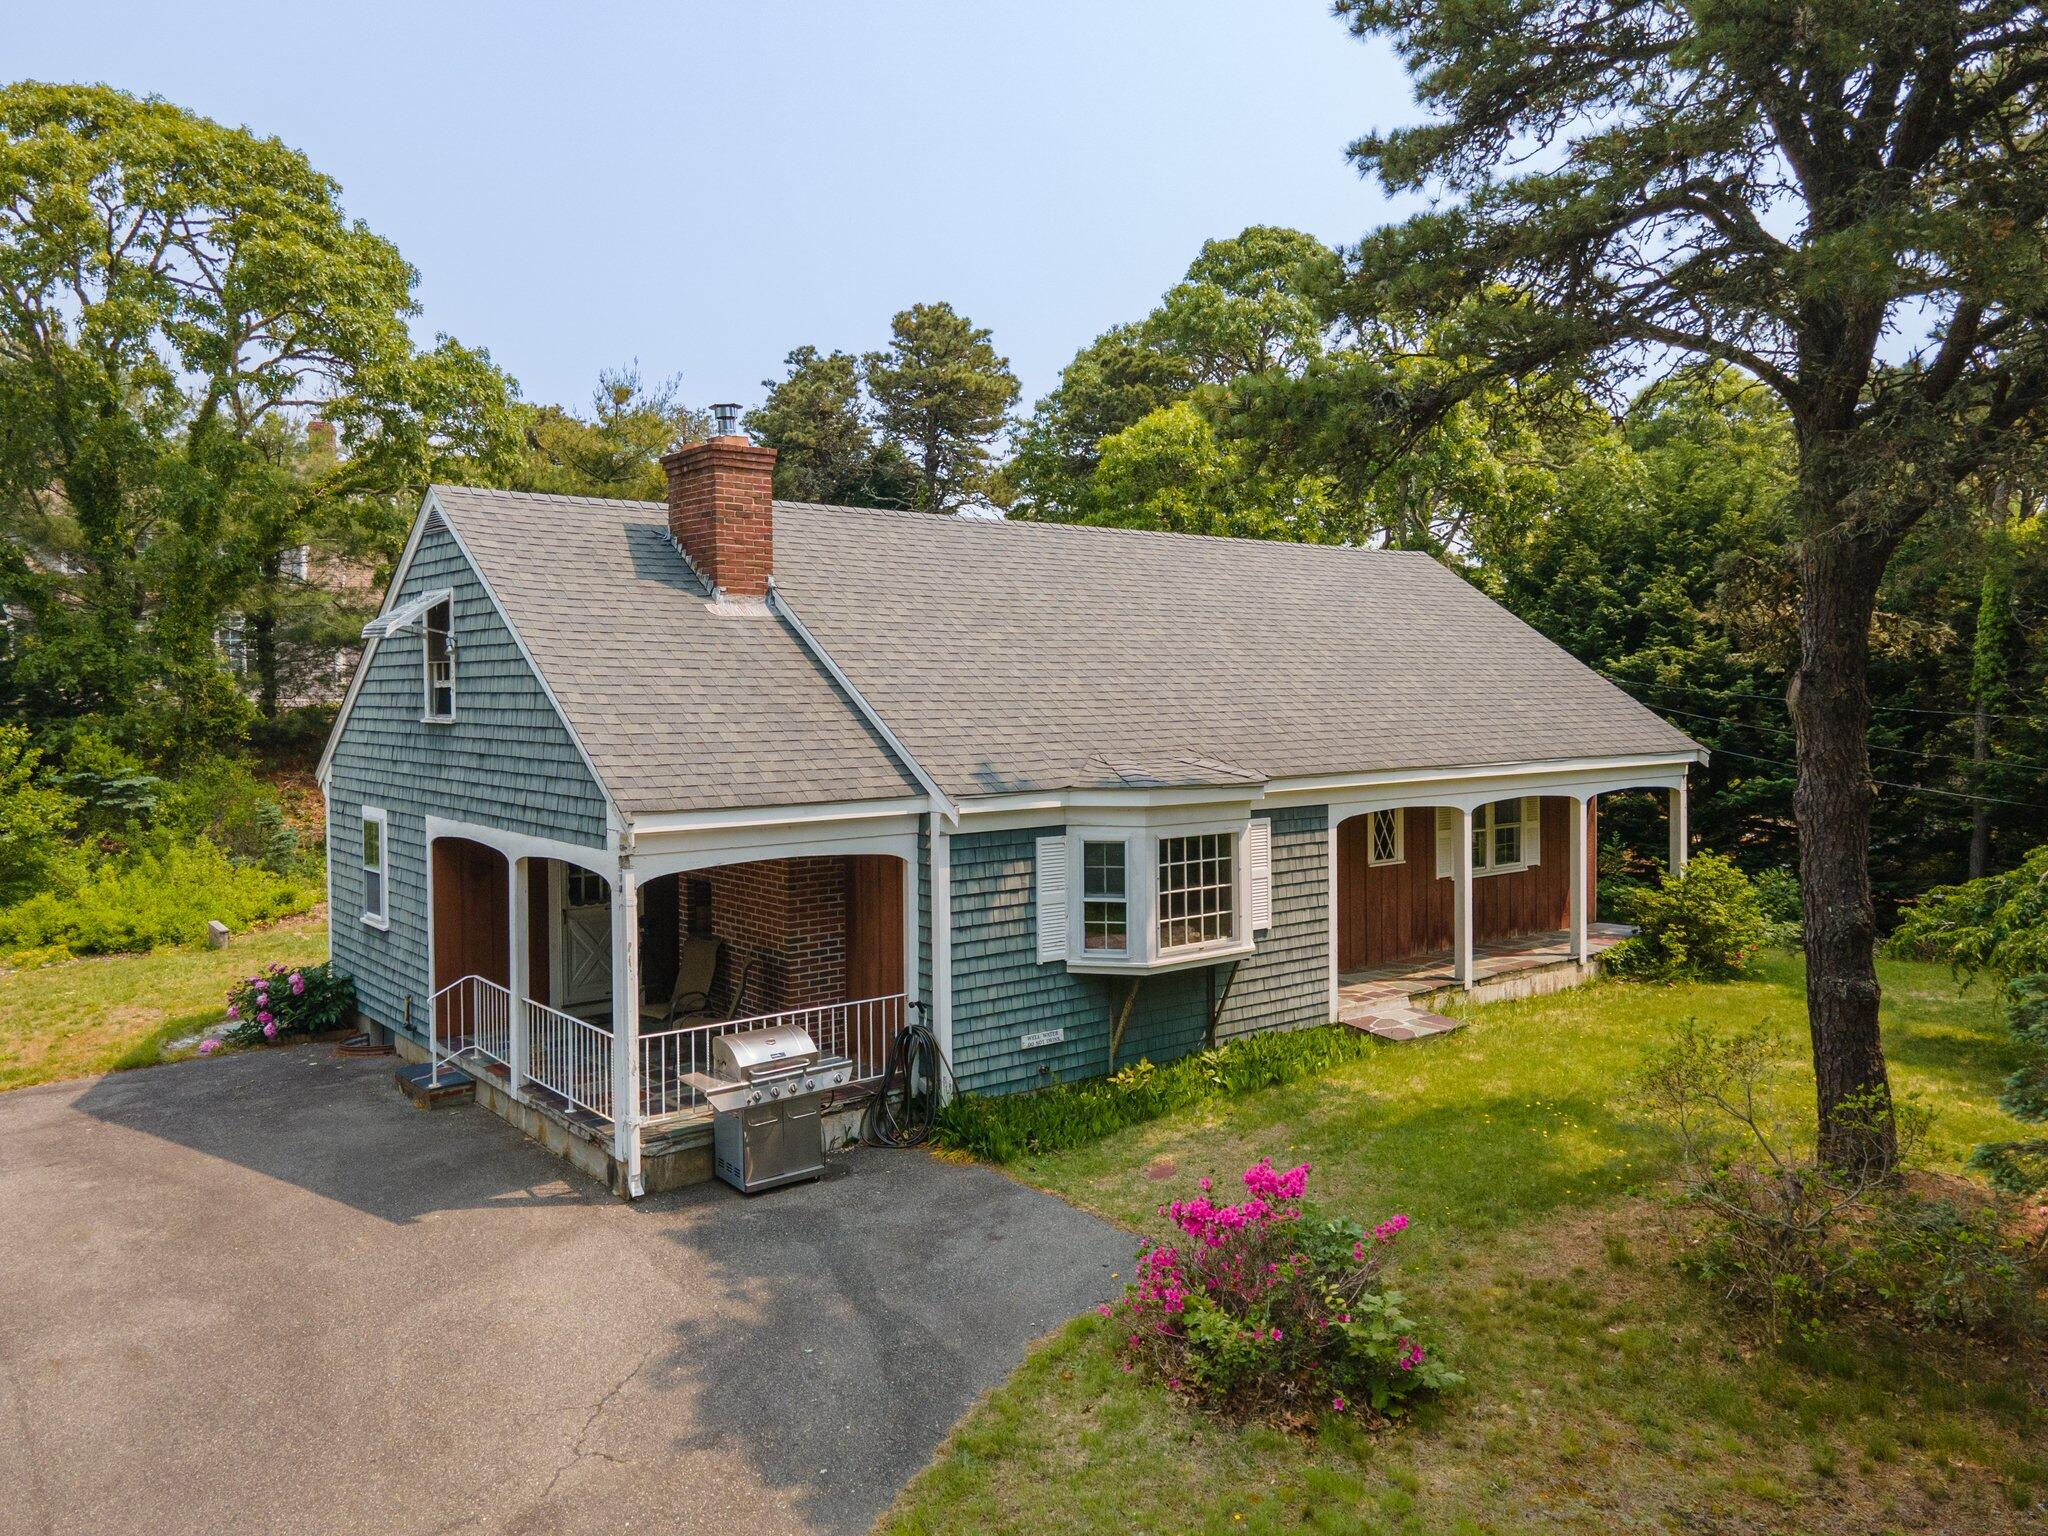 45 Meadow View Rd S, Chatham, MA 02633